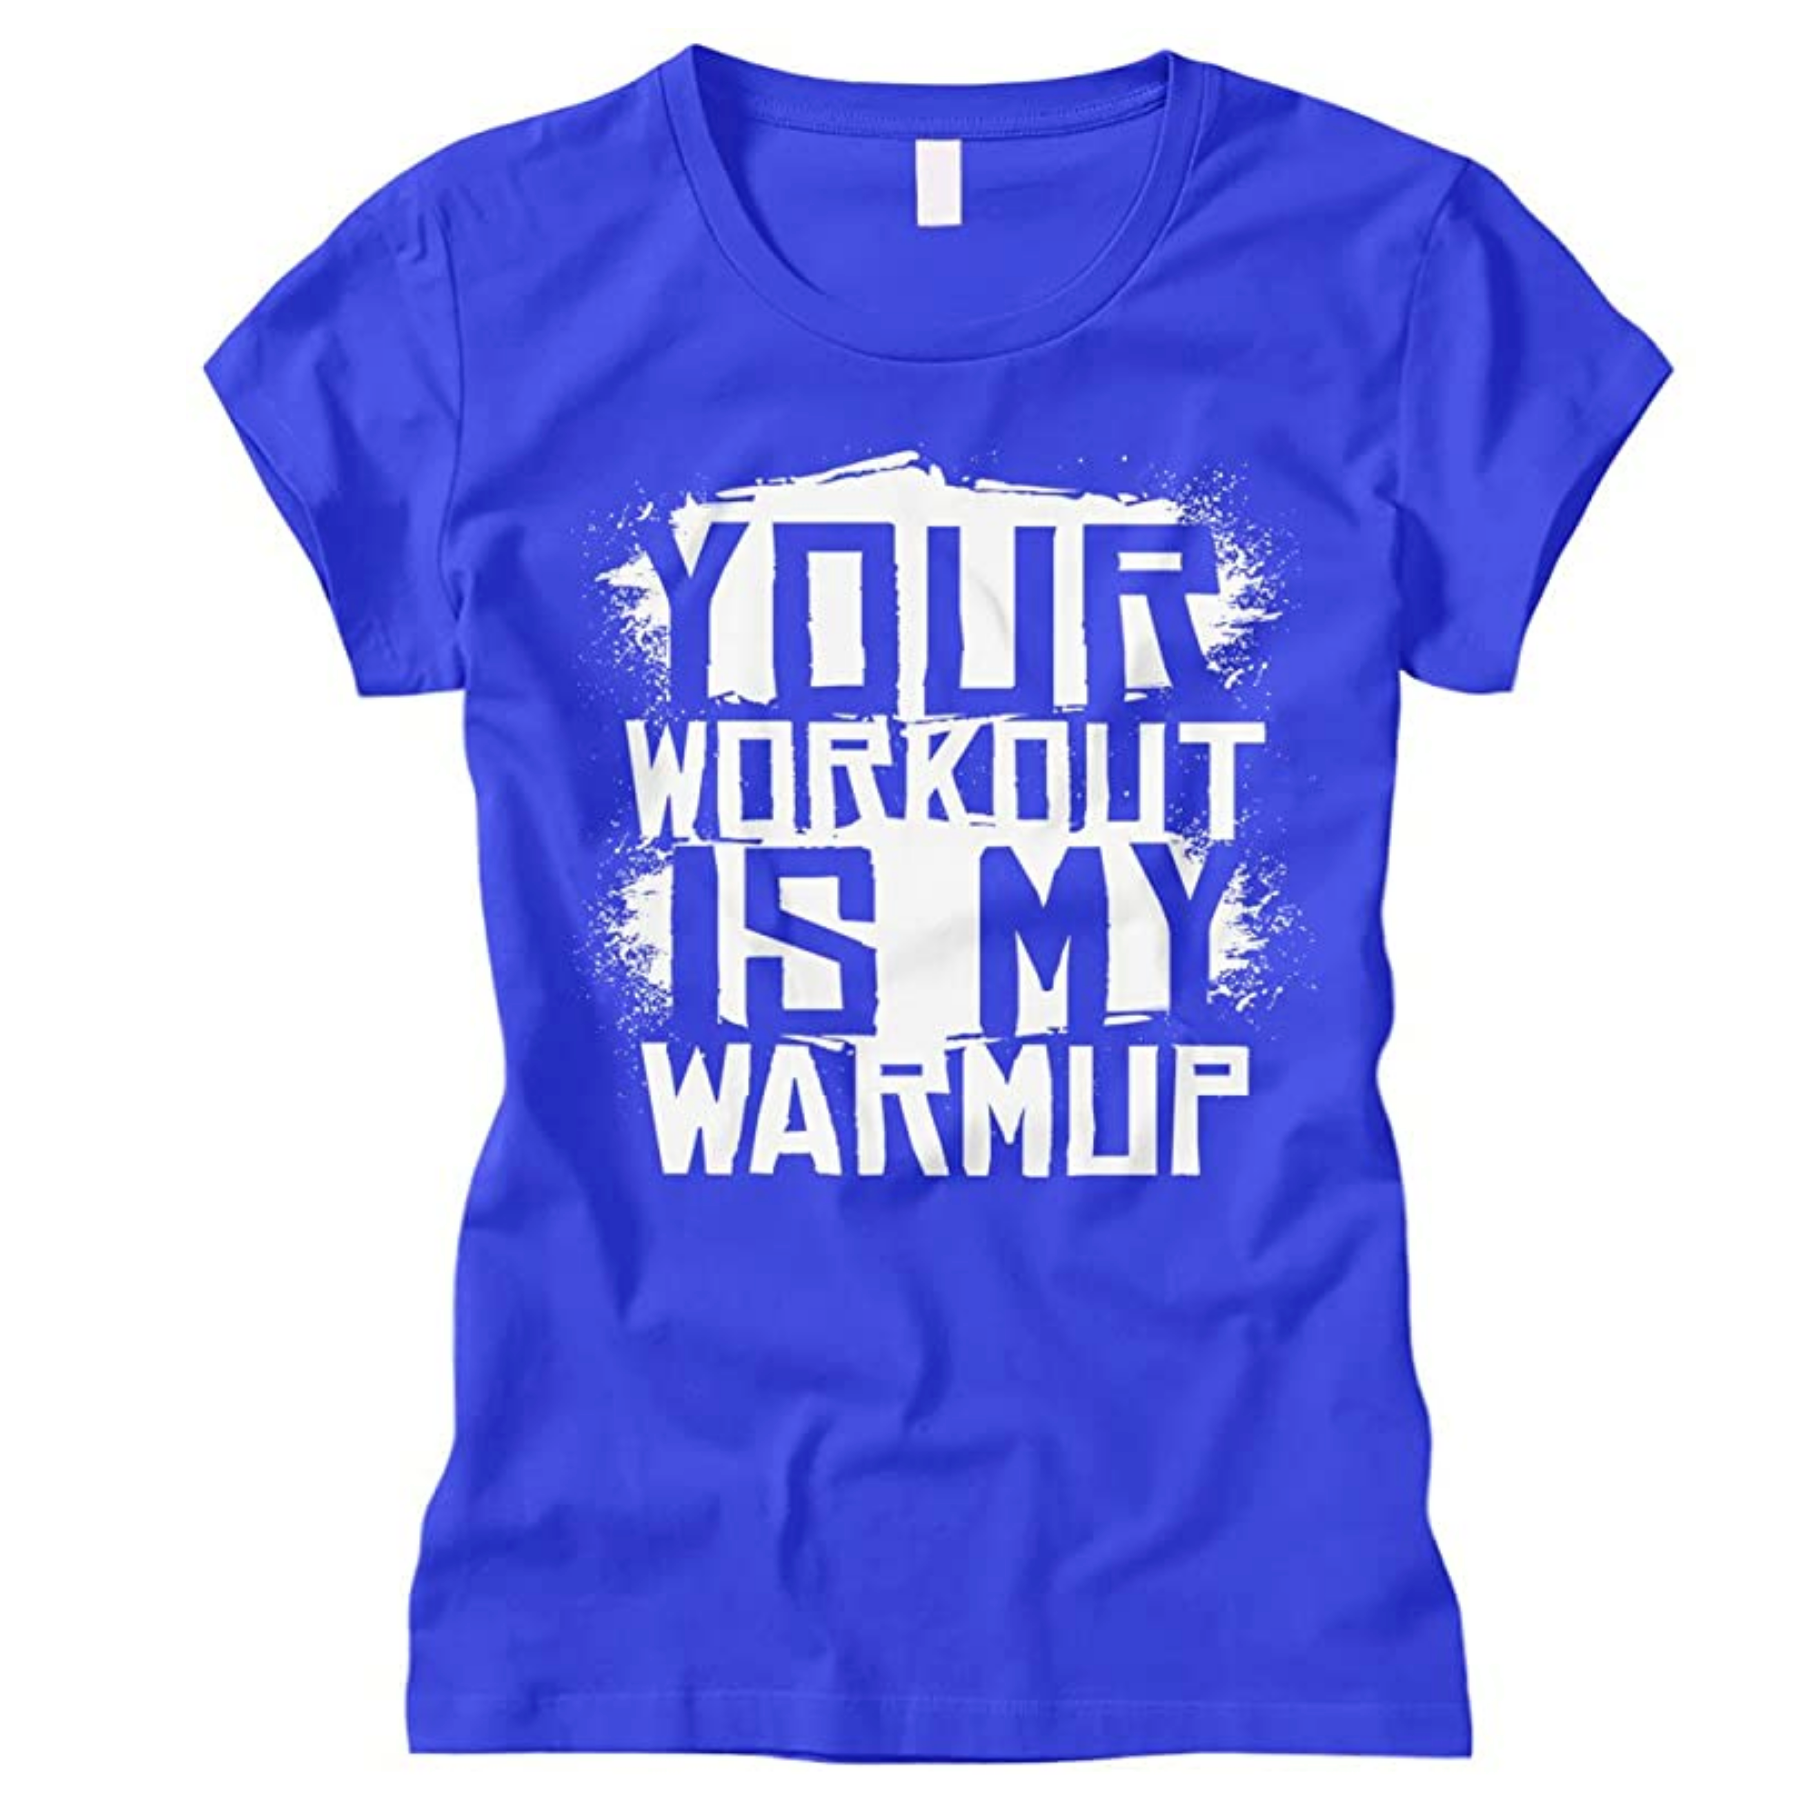 Funny Crossfit Workout Women’s T-Shirt - Your Workout Is My Warm Up - Soft Tee